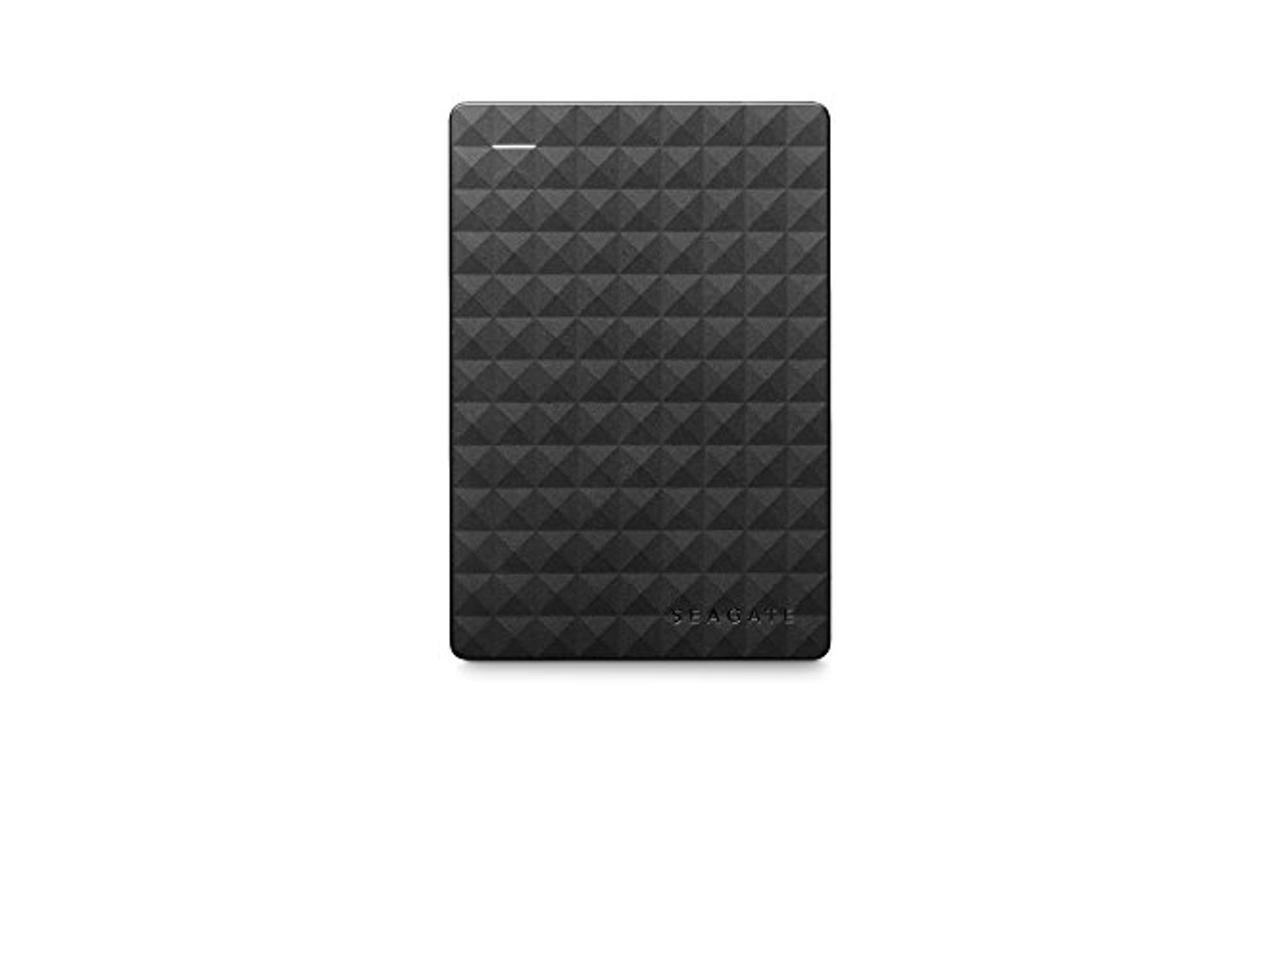 Seagate Portable Hard Drive 1.5Tb Hdd - External Expansion For Pc Windows Ps4 & Xbox - Usb 2.0 & 3.0 Black (Stea1500400)